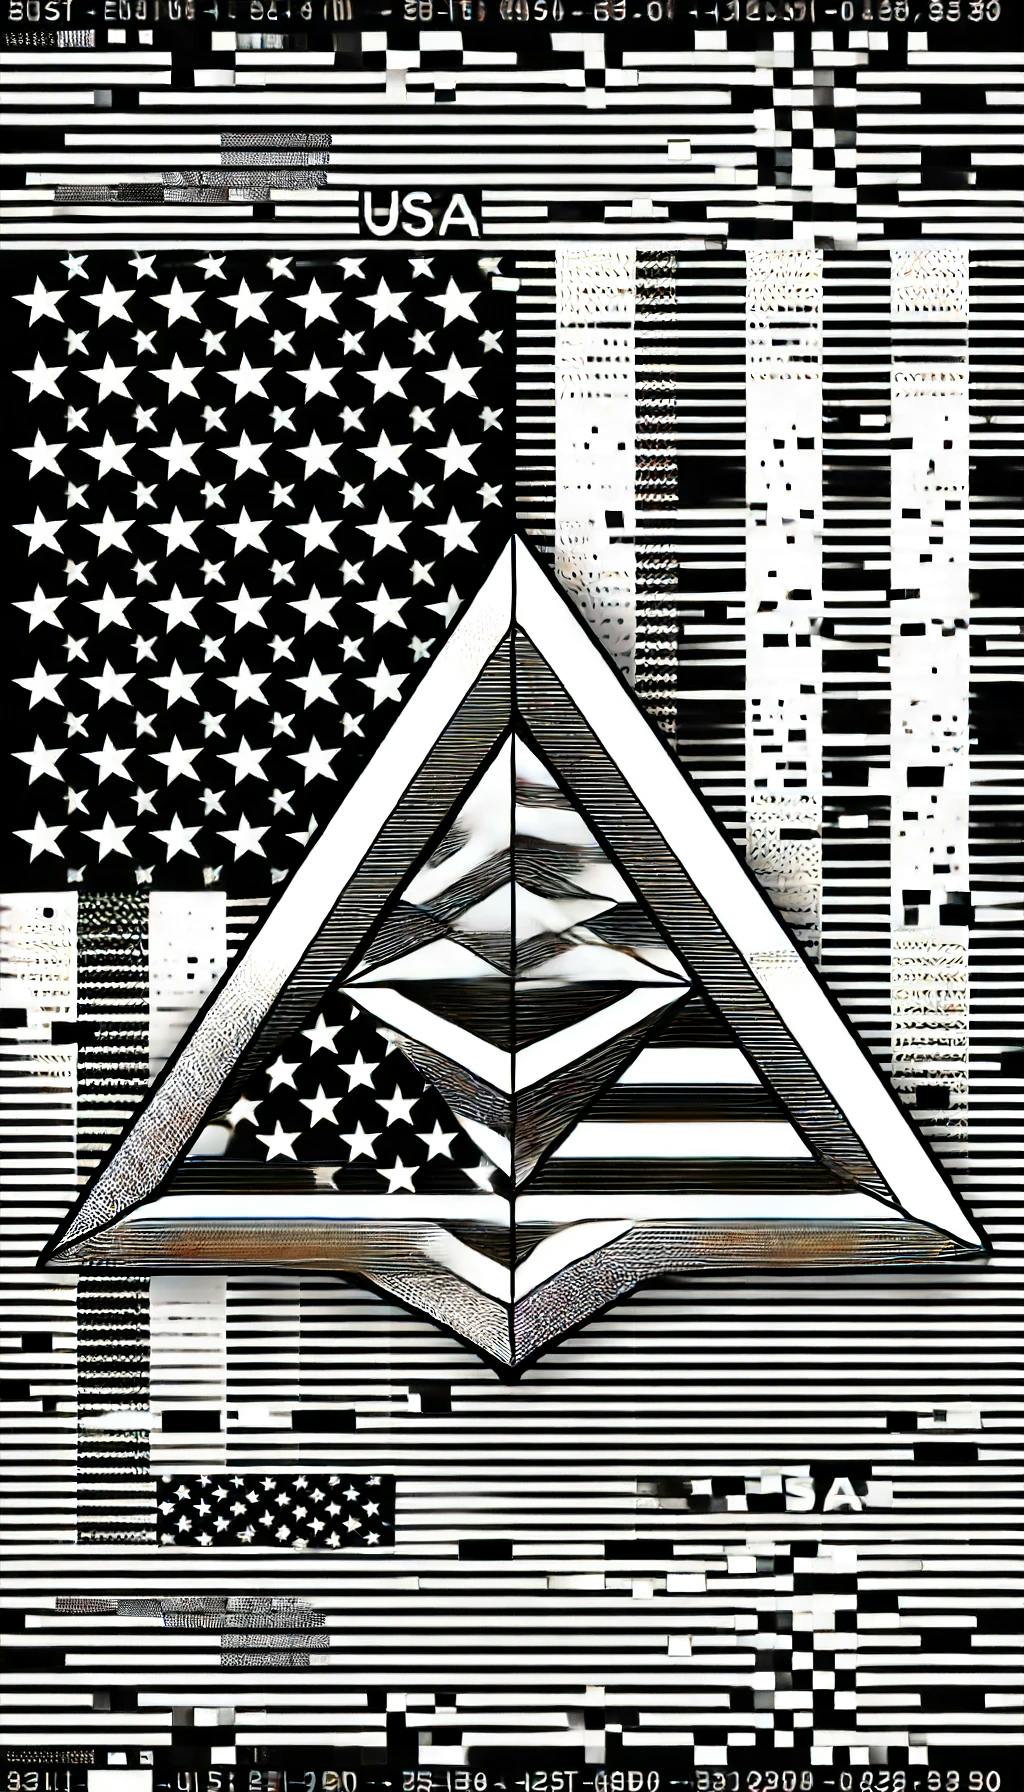 DALL·E 2024-06-18 08.53.08 - Create an extremely simple and elegant glitch art style image with a USA patriotic theme in black and white, featuring a clear 3D tetrahedron. Focus o.webp